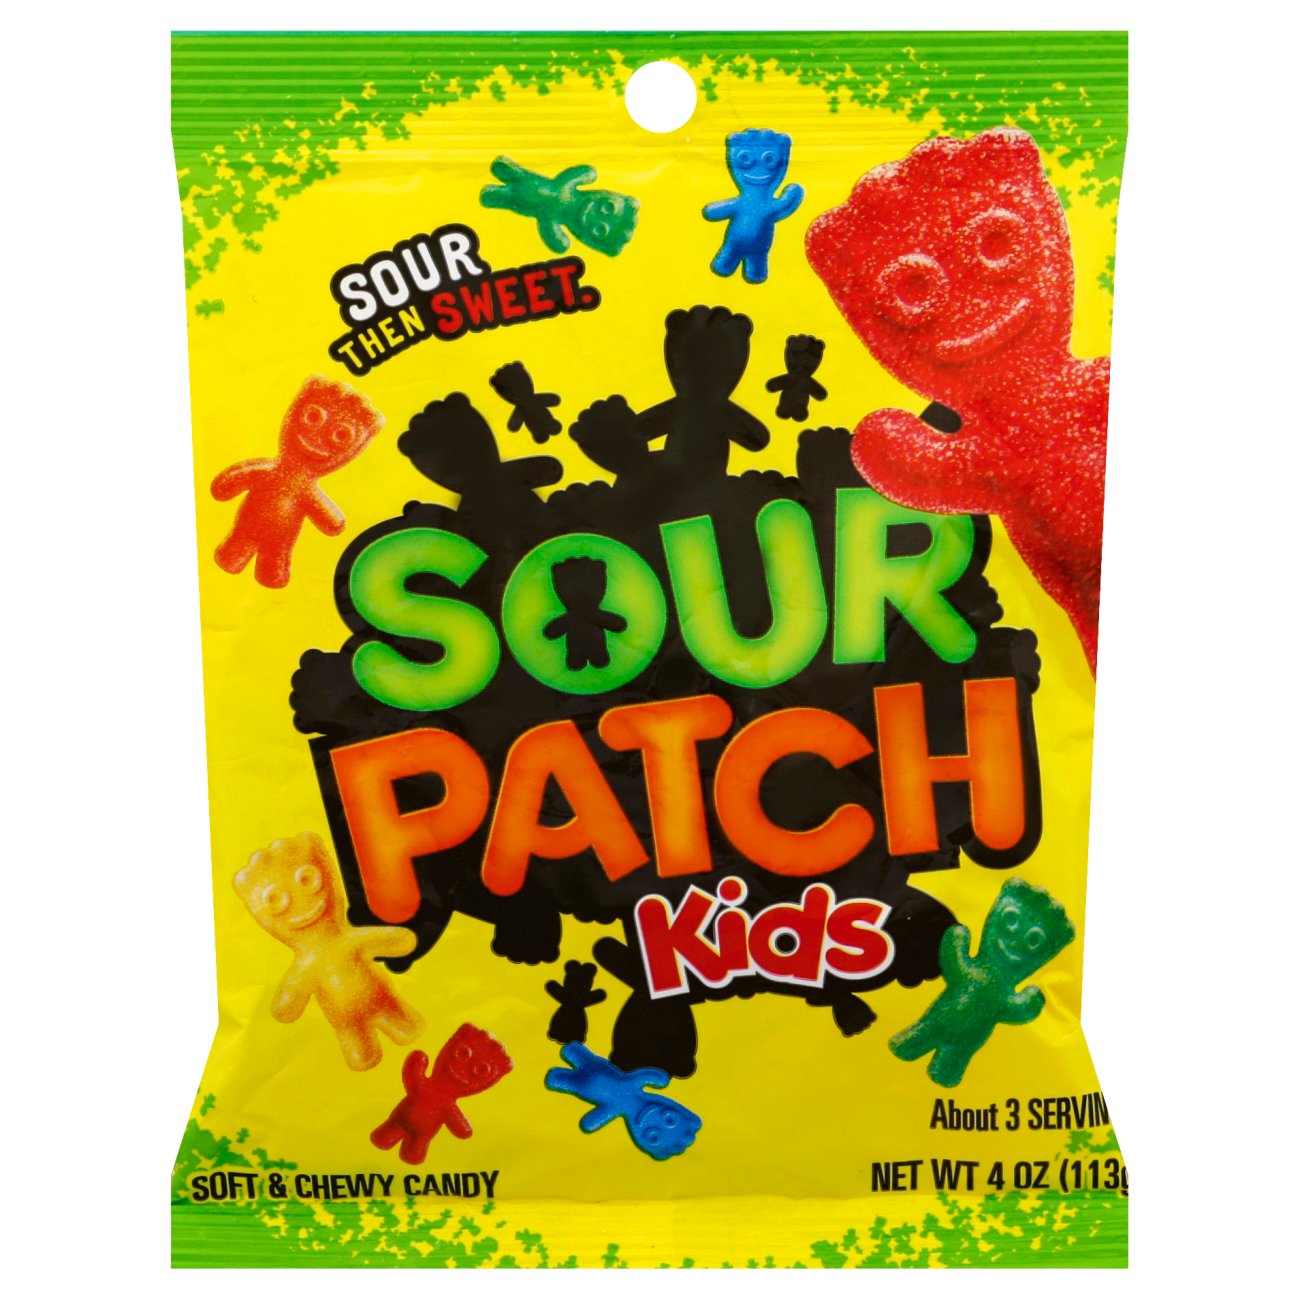 Sour Patch Soft and Chewy Candy Kids. Sour Patch. Chewy магазин. Mushy and Chewy. Sour patch kids